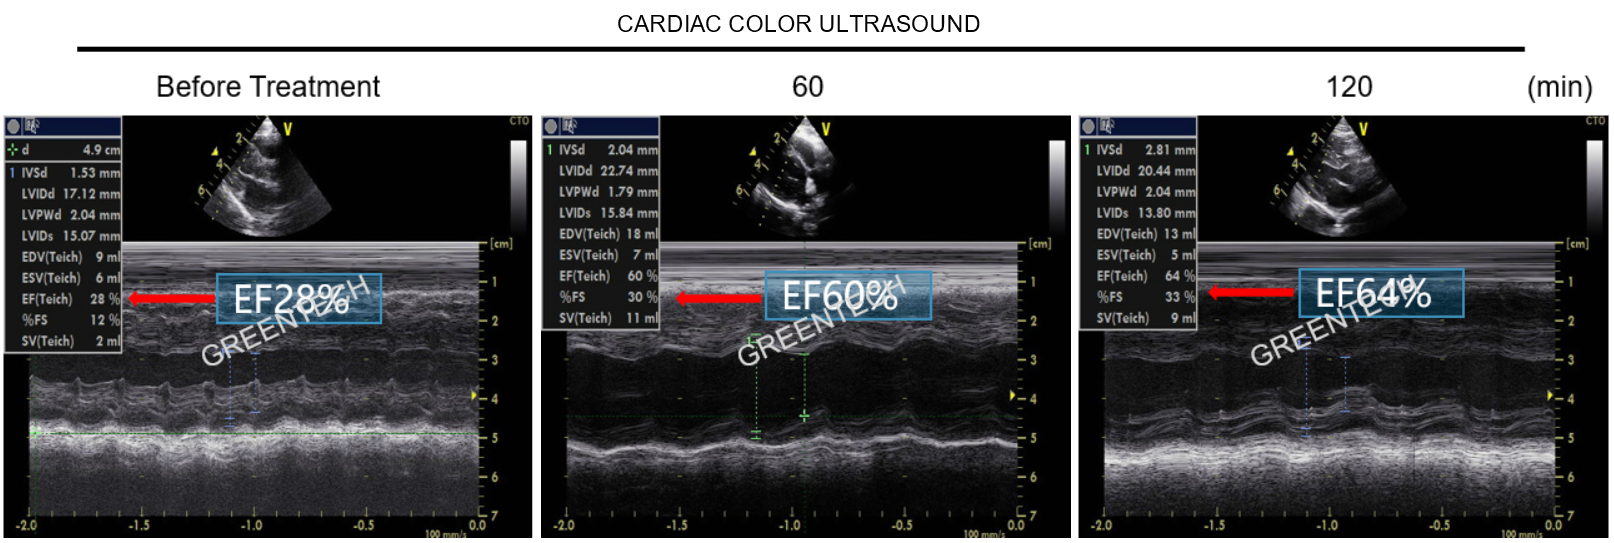 Cardiac color ultrasound examination in NHP models of rapid pacing-induced heart failure.png